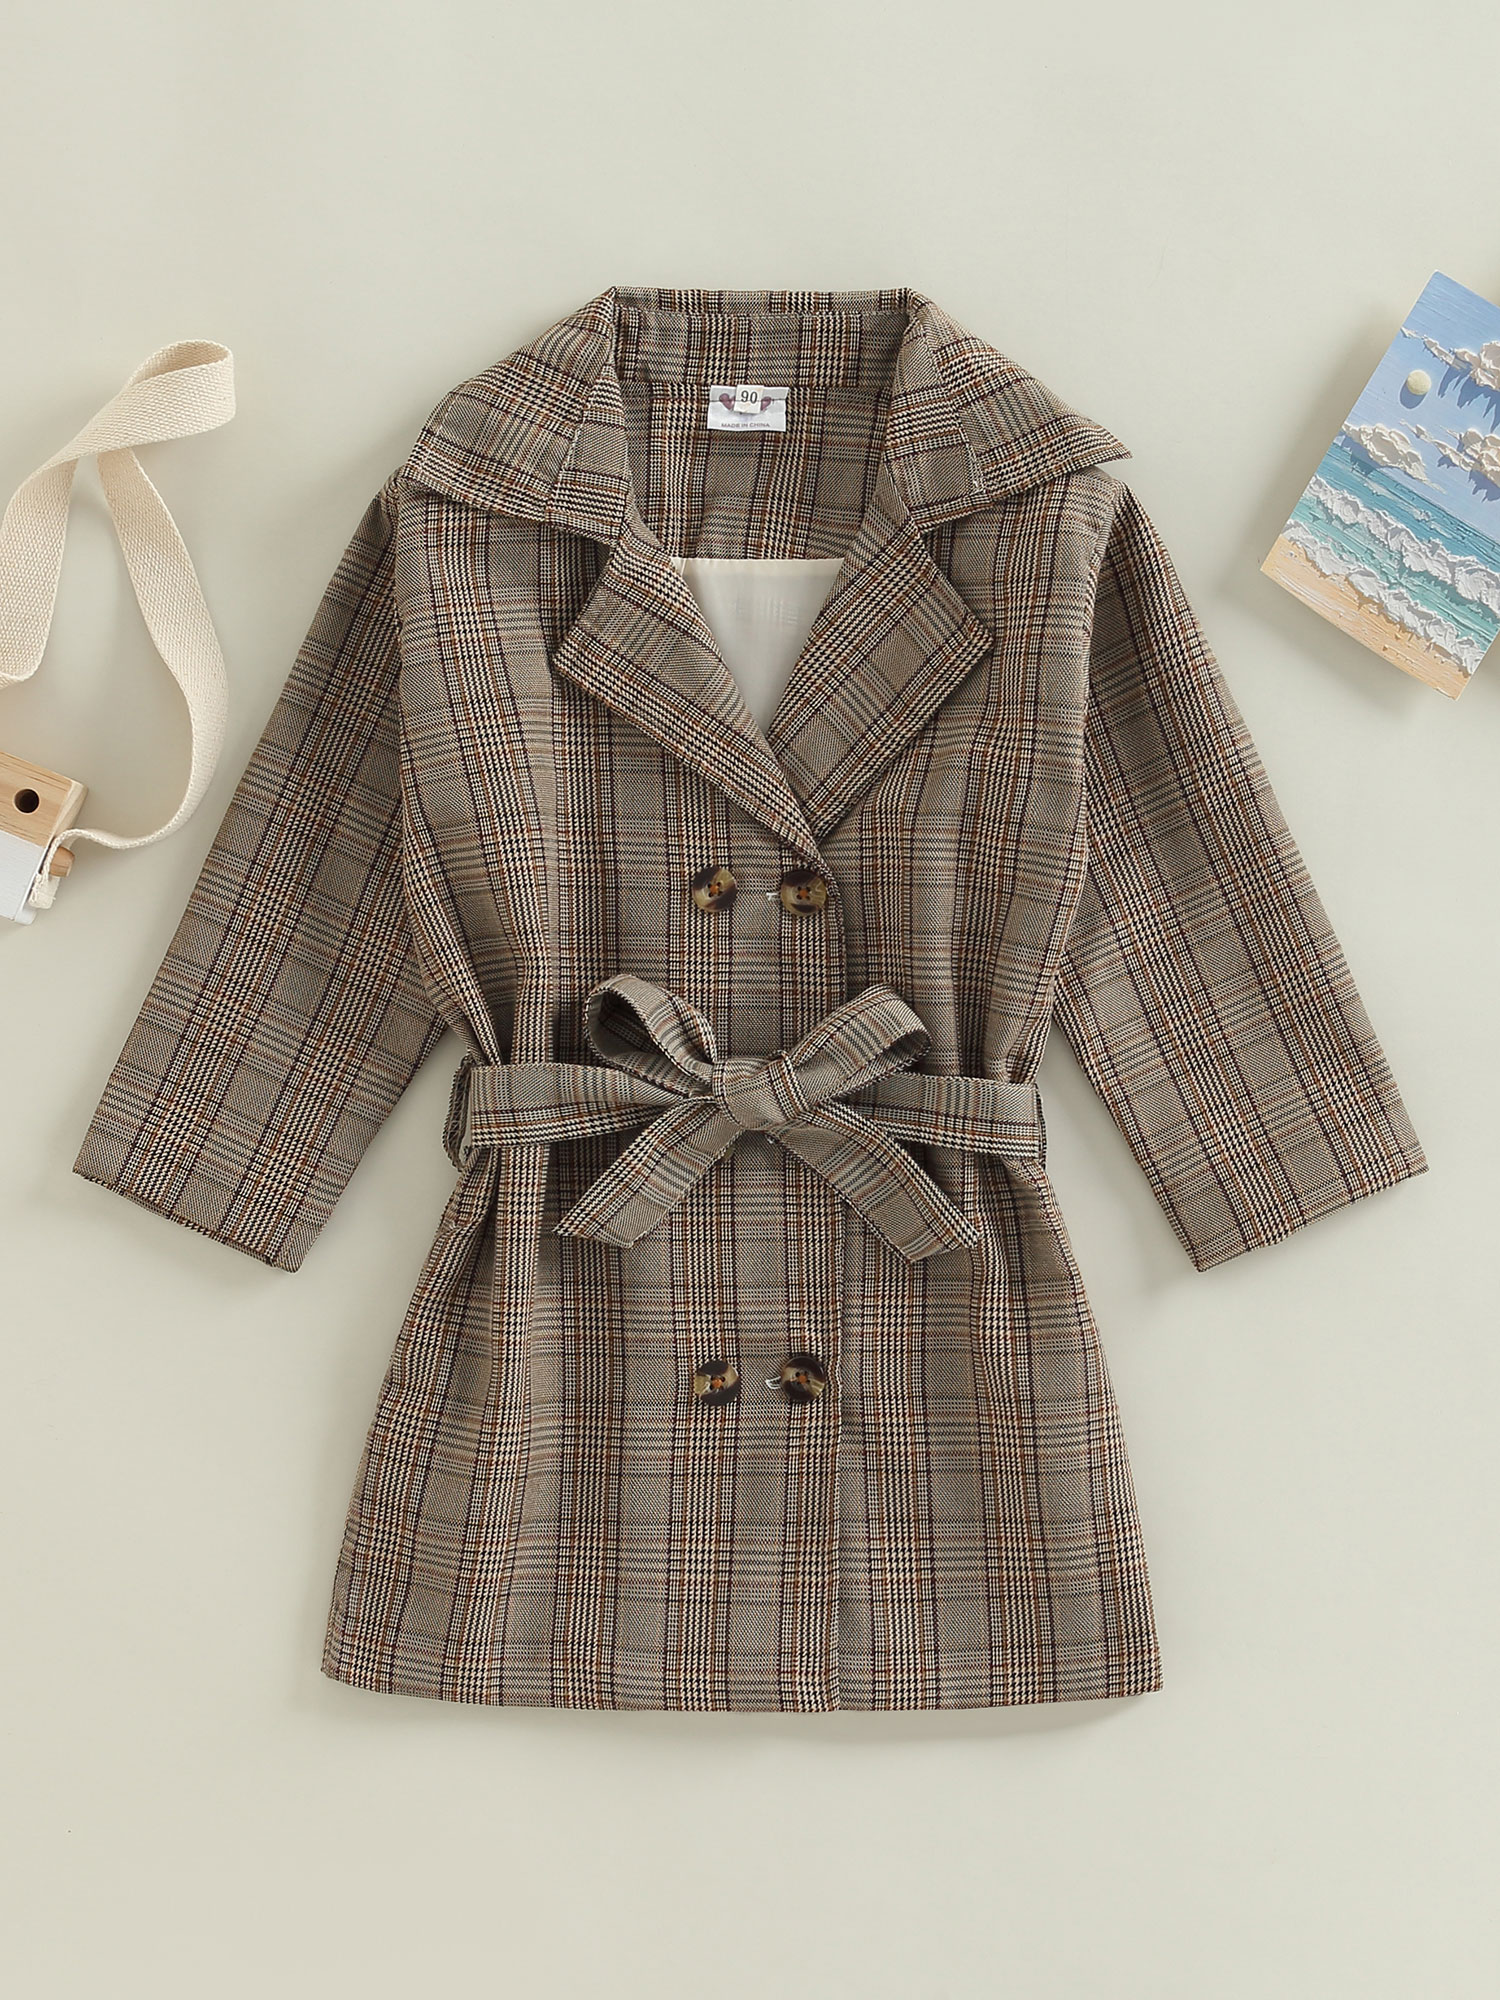 JYYYBF Toddler Baby Girl Trench Coat Long Sleeve Plaid Print Double-Breasted Belted Jacket Lapel Windbreaker Outerwear Grey 2-3 Years - image 3 of 7